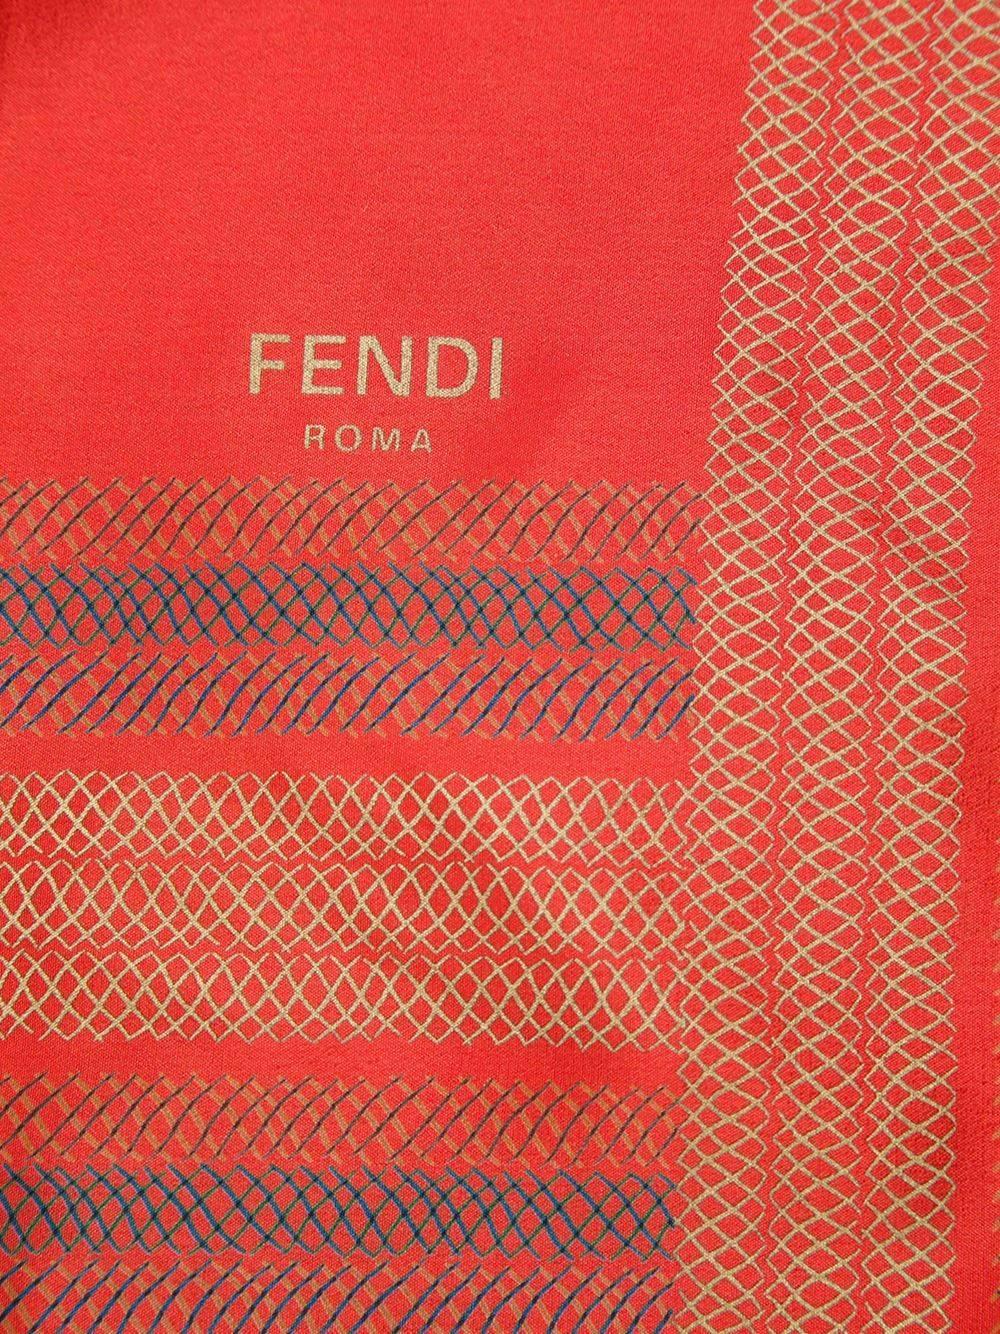 Gorgeous Fendi silk scarf featuring finished edges and a printed logo. Excellent condition. Simple & so chic! Marked Fendi Roma. Size: 90 cm - 35.4 in. 